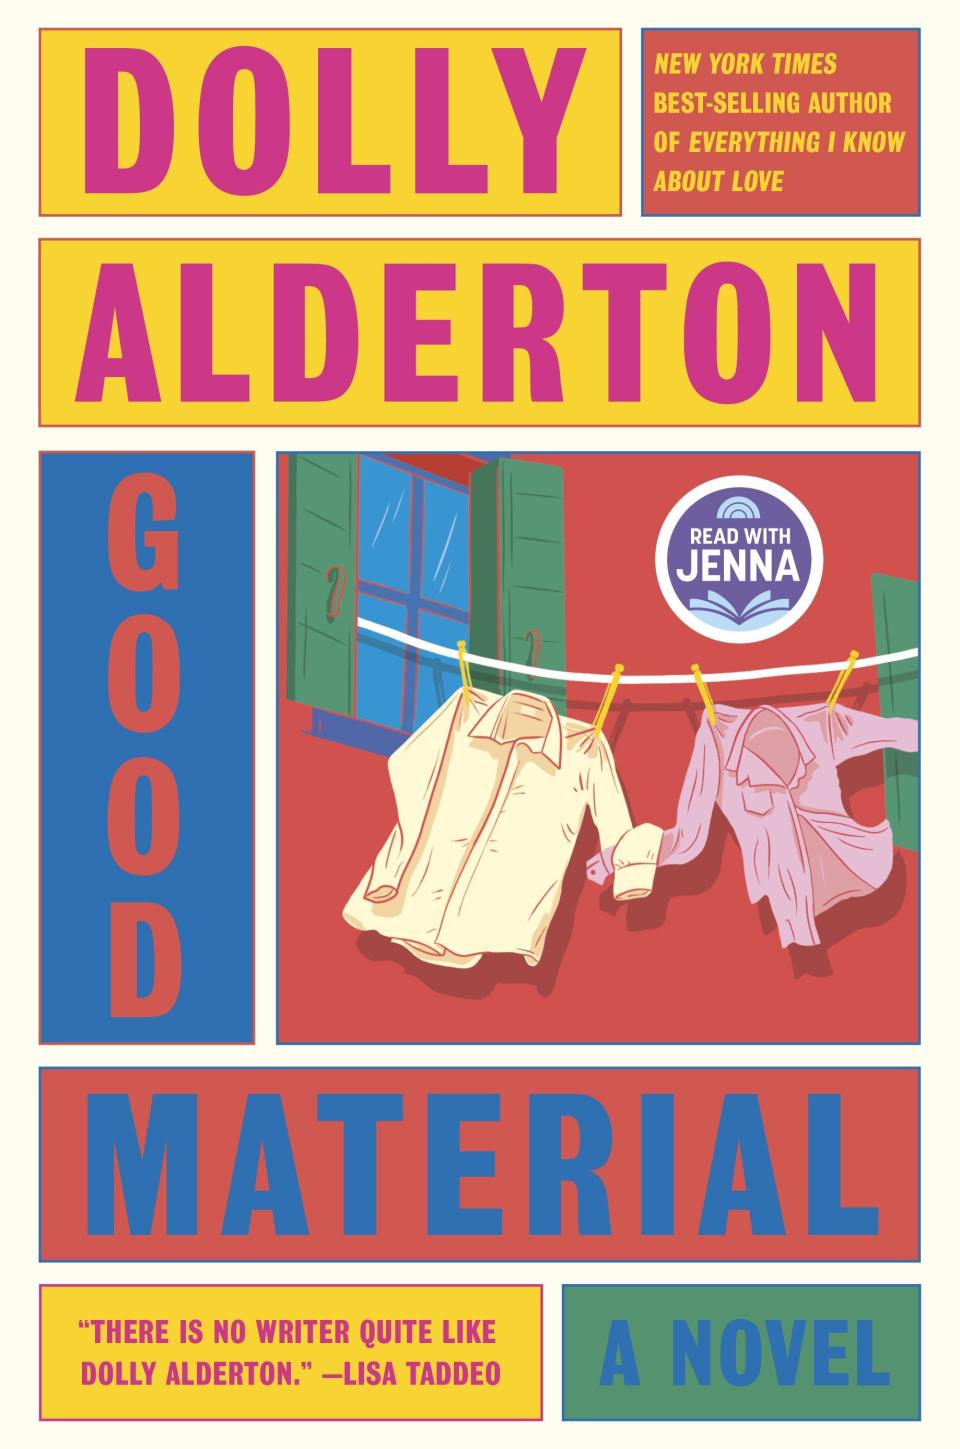 Dolly Alderton's novel "Good Material" is "a story about heartbreak and friendship, and how to survive both."